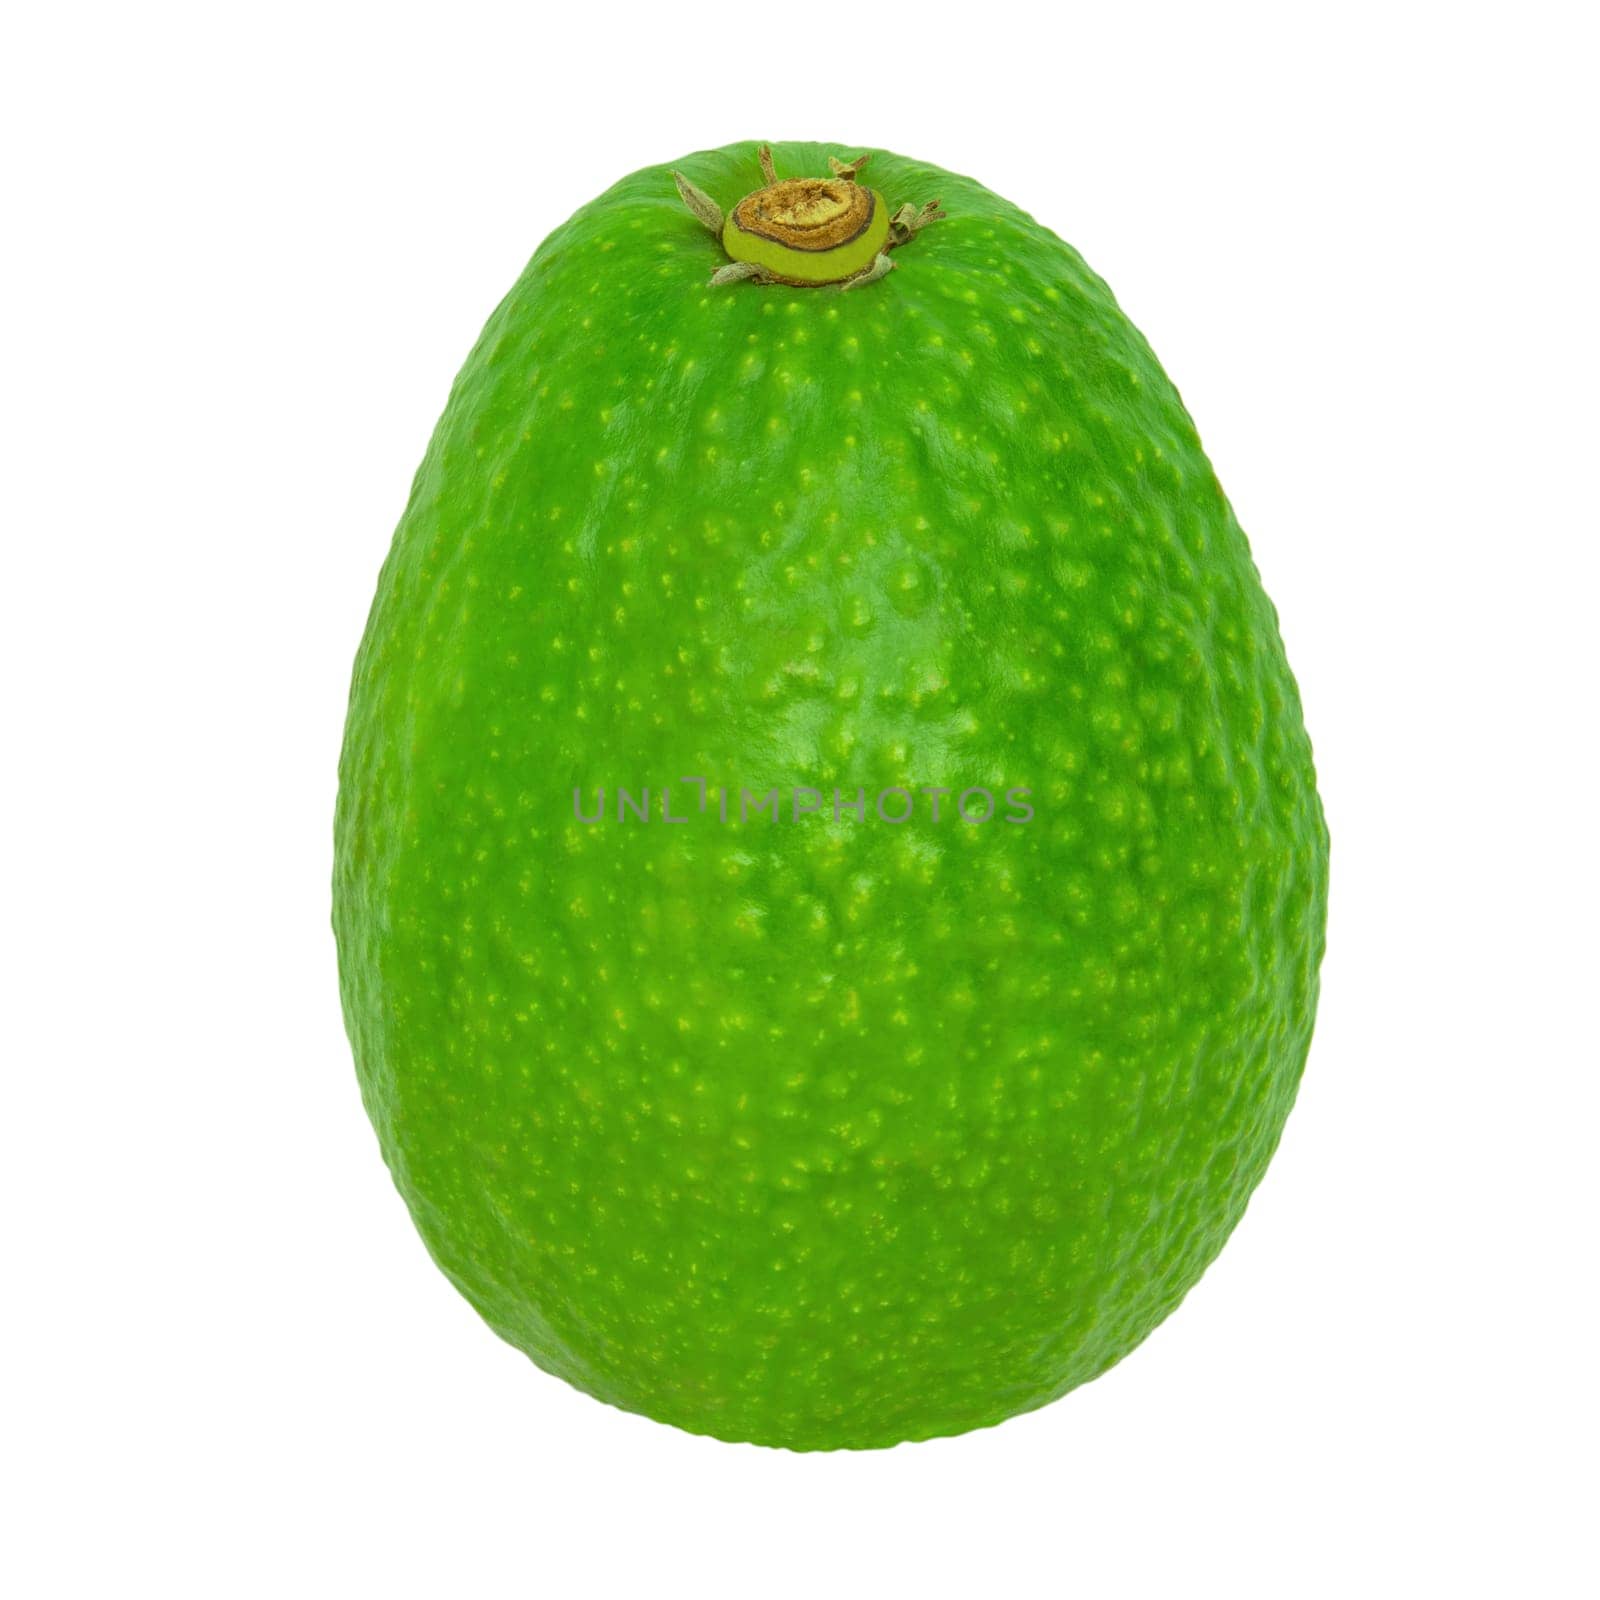 Green avocado isolated on a white background. Stock photography.